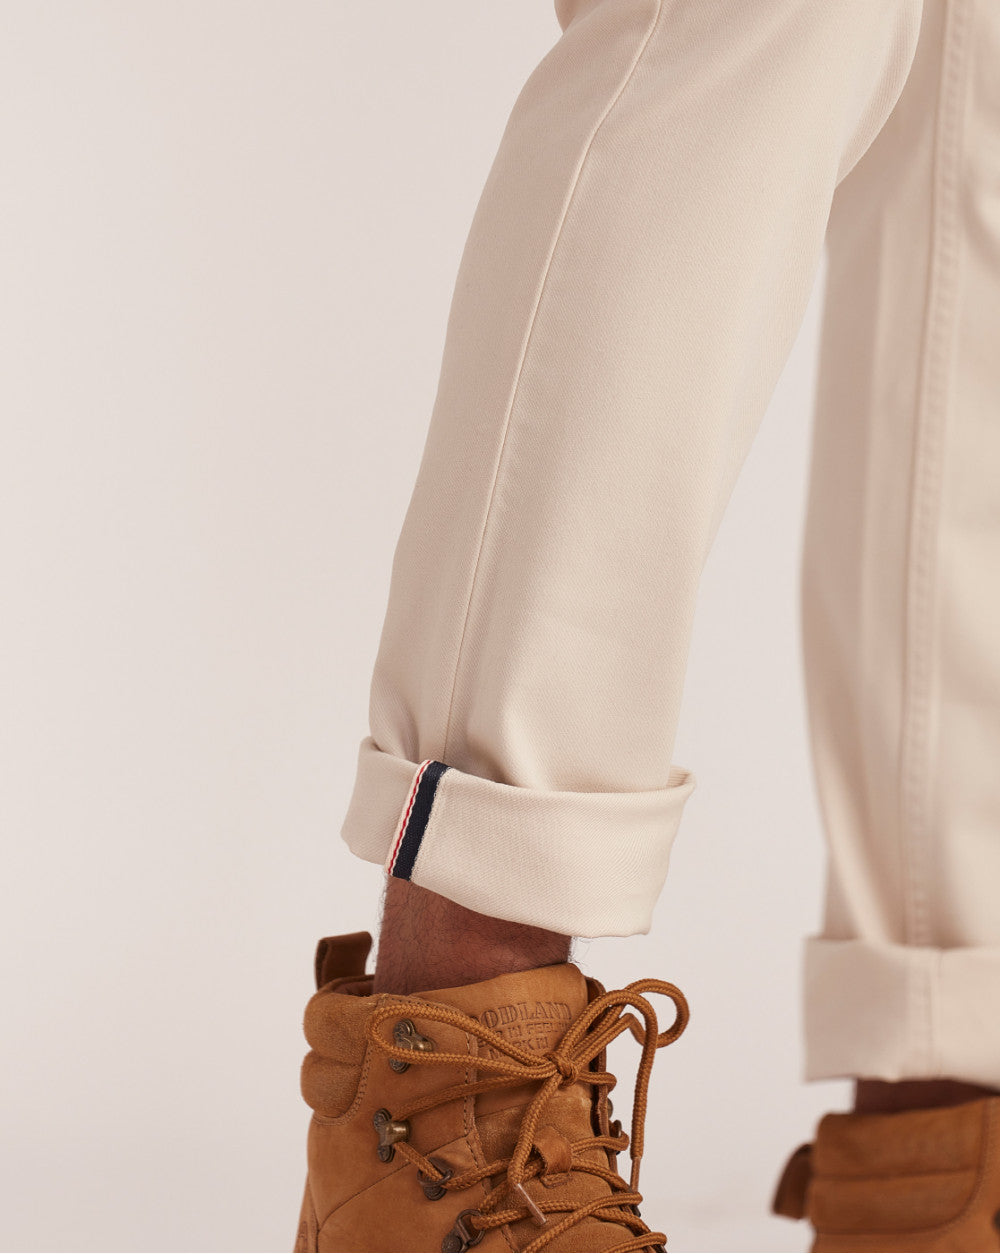 Straight Fit Five-Pocket Luxe Pants - Off White